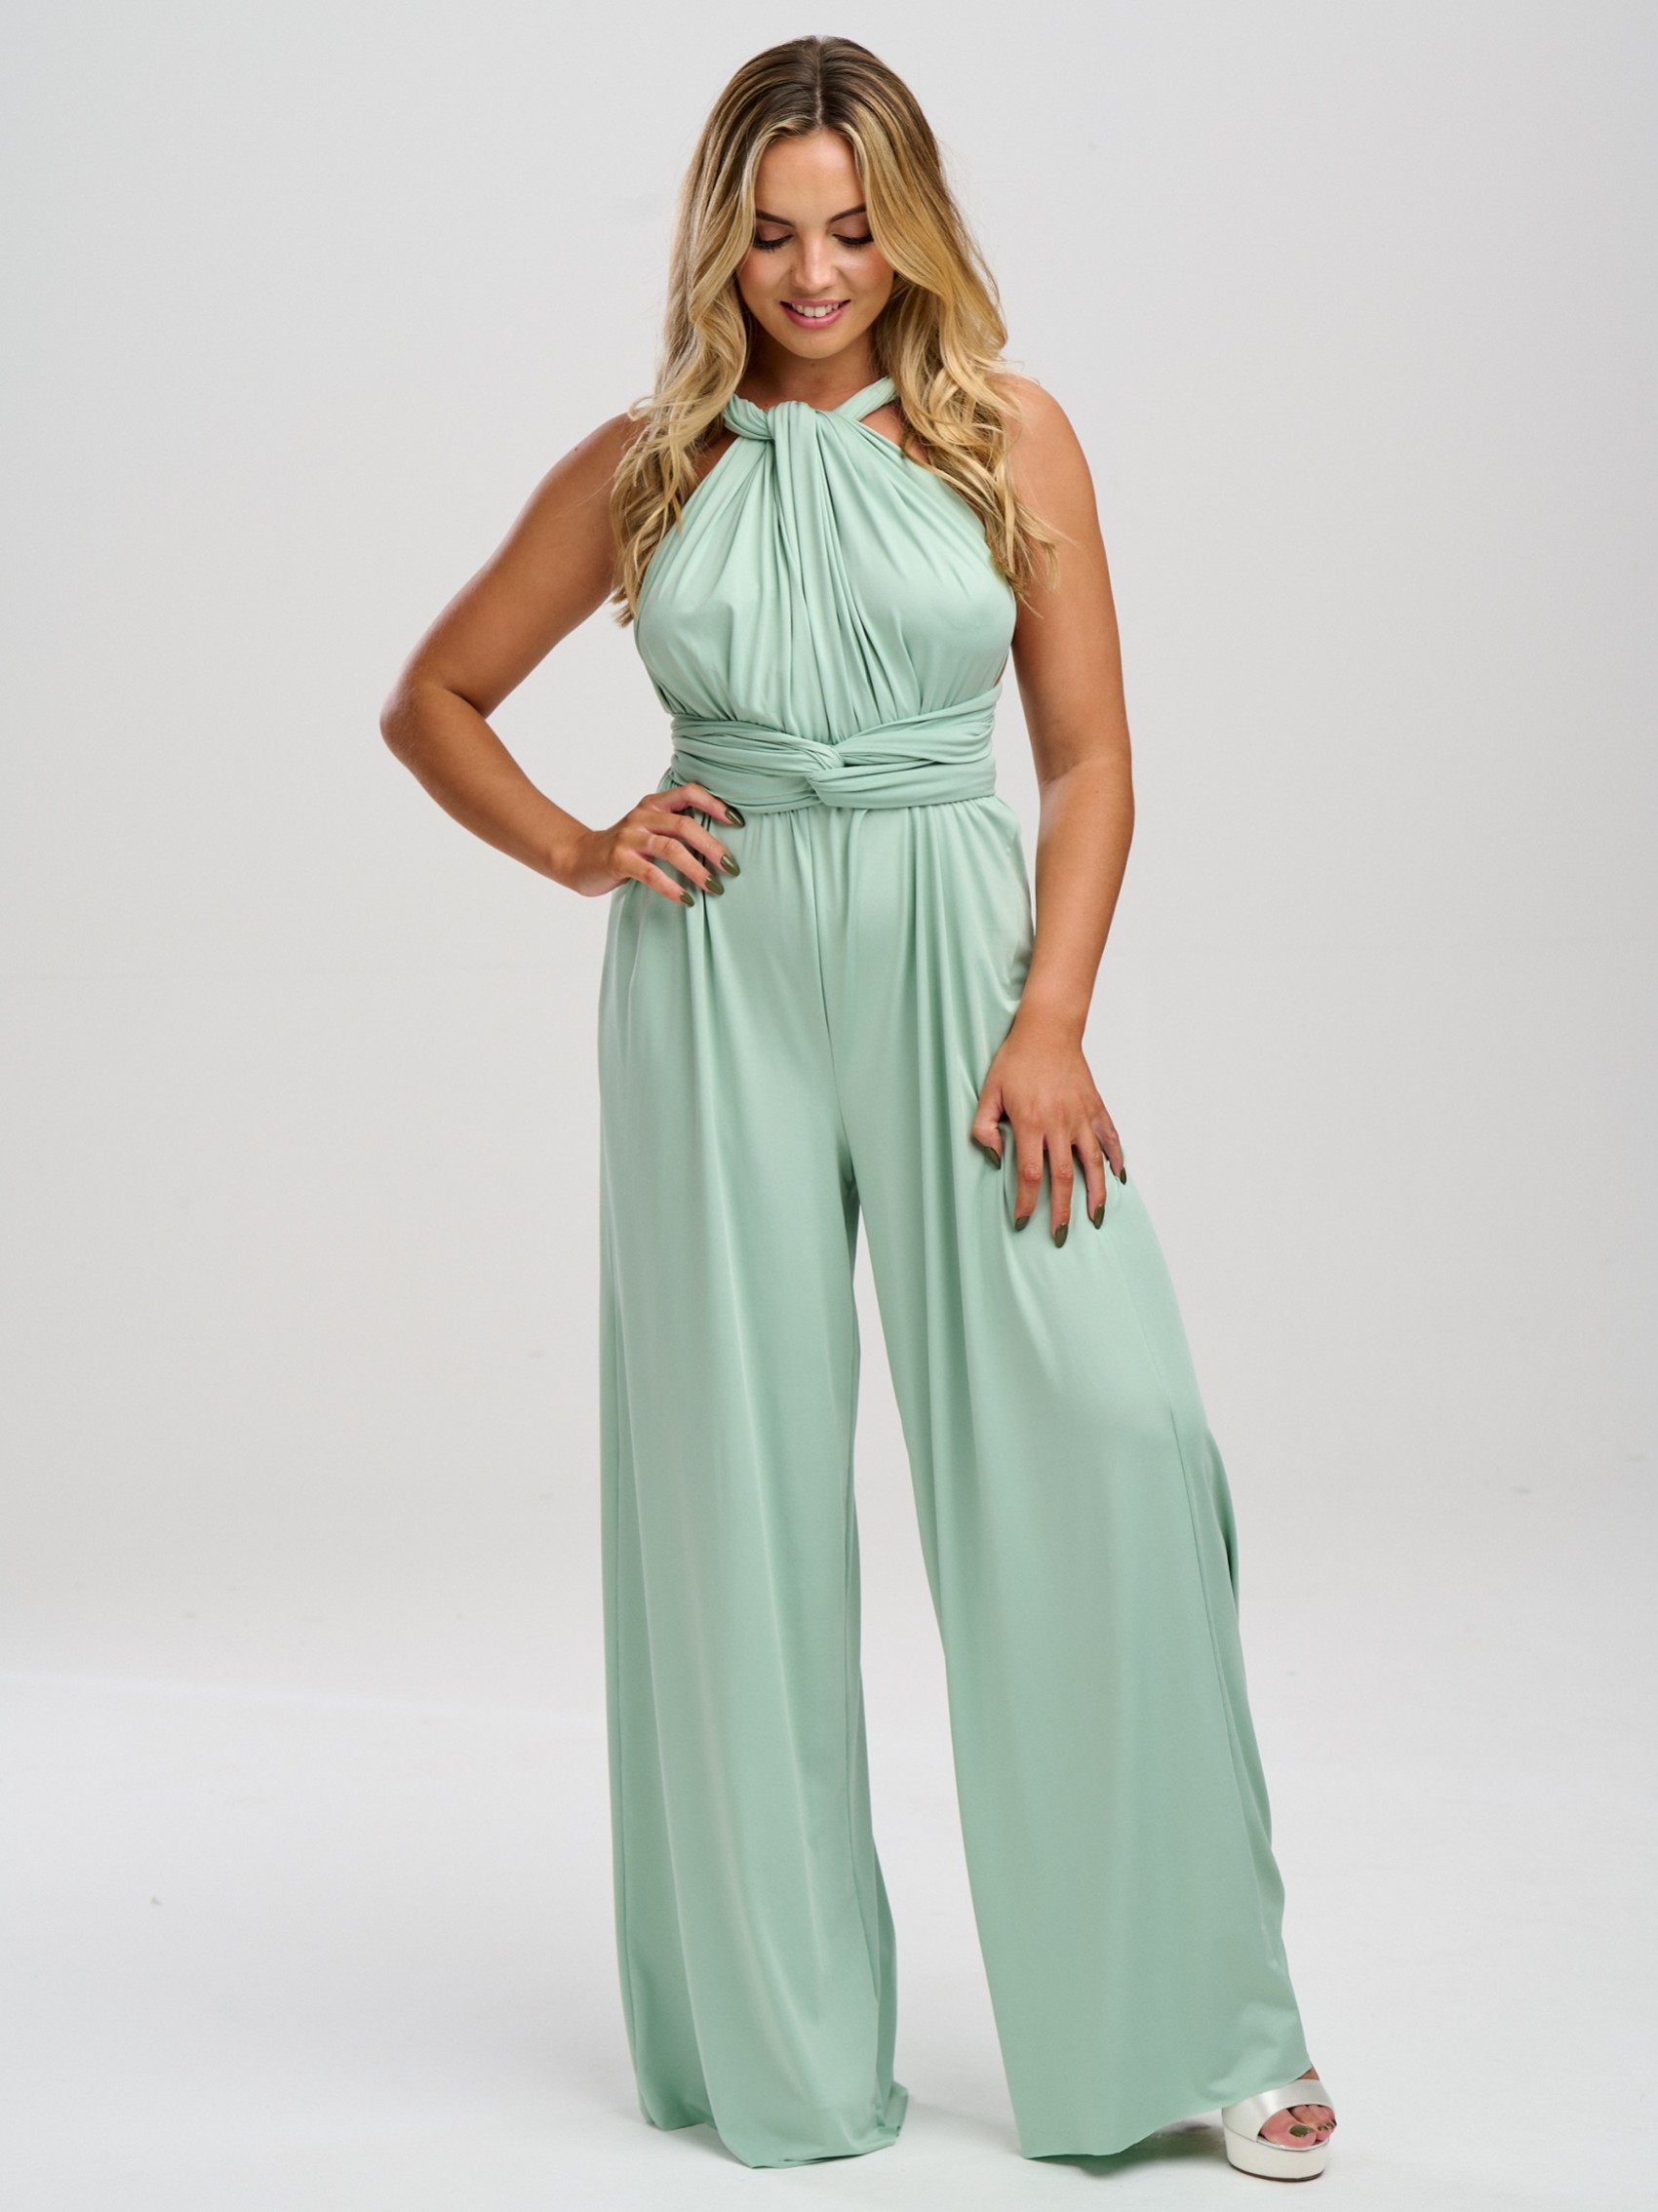 Emily Rose Mint Green Multiway Bridesmaid Jumpsuit